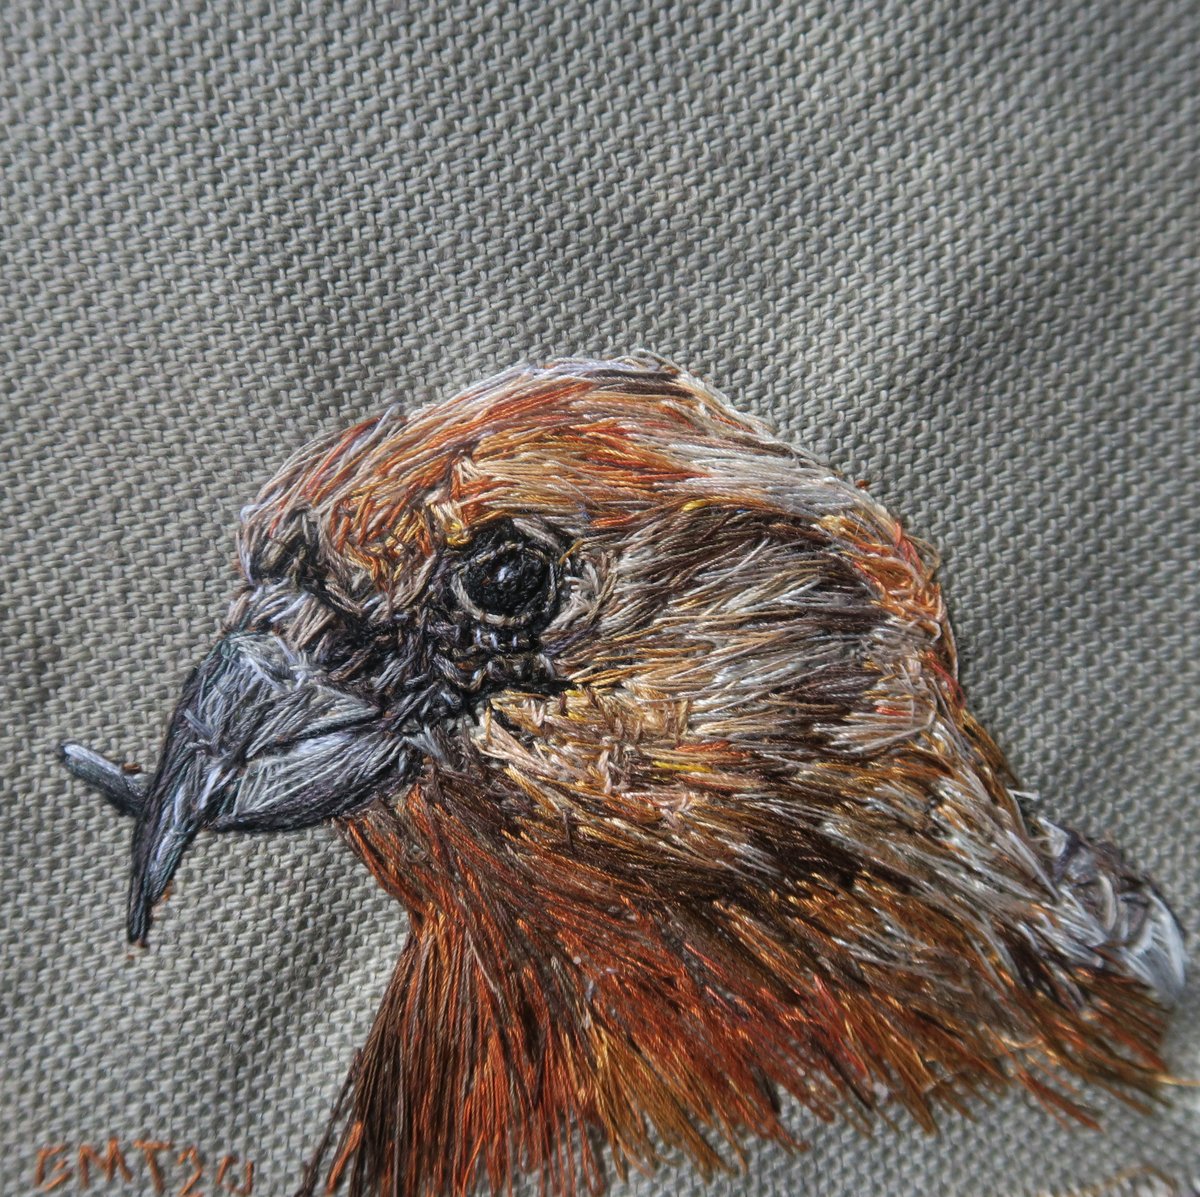 Crossbill
original miniature bird thread painting artwork, created with hand stitching. Set in a black frame.
emilytull.co.uk/store/p161/cro…
#EarlyBiz #MHHSBD